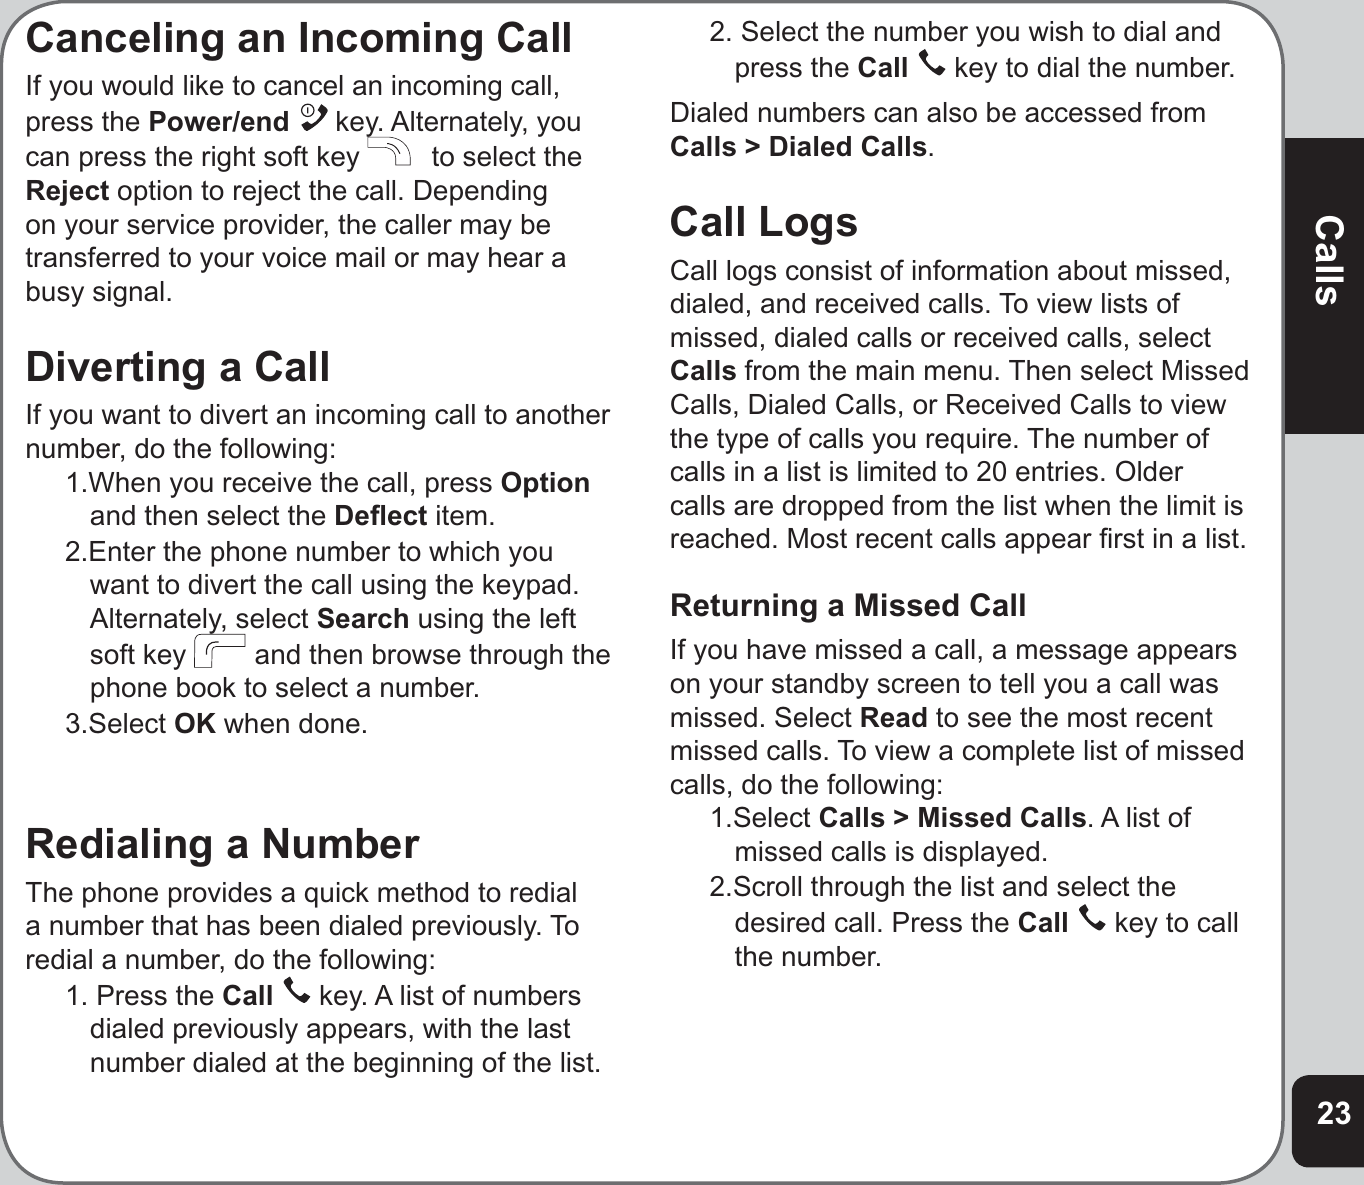 23CallsCanceling an Incoming CallIf you would like to cancel an incoming call, press the Power/end  key. Alternately, you can press the right soft key   to select the Reject option to reject the call. Depending on your service provider, the caller may be transferred to your voice mail or may hear a busy signal.Diverting a CallIf you want to divert an incoming call to another number, do the following:1.When you receive the call, press Optionand then select the Deﬂ ect item.2.Enter the phone number to which you want to divert the call using the keypad. Alternately, select Search using the left soft key   and then browse through the phone book to select a number.3.Select OK when done.Redialing a NumberThe phone provides a quick method to redial a number that has been dialed previously. To redial a number, do the following:1. Press the Call  key. A list of numbers dialed previously appears, with the last number dialed at the beginning of the list.2. Select the number you wish to dial and press the Call  key to dial the number.Dialed numbers can also be accessed from Calls &gt; Dialed Calls.Call LogsCall logs consist of information about missed, dialed, and received calls. To view lists of missed, dialed calls or received calls, select Calls from the main menu. Then select Missed Calls, Dialed Calls, or Received Calls to view the type of calls you require. The number of calls in a list is limited to 20 entries. Older calls are dropped from the list when the limit is reached. Most recent calls appear ﬁ rst in a list.Returning a Missed CallIf you have missed a call, a message appears on your standby screen to tell you a call was missed. Select Read to see the most recent missed calls. To view a complete list of missed calls, do the following:1.Select Calls &gt; Missed Calls. A list of missed calls is displayed.2.Scroll through the list and select the desired call. Press the Call  key to call the number.